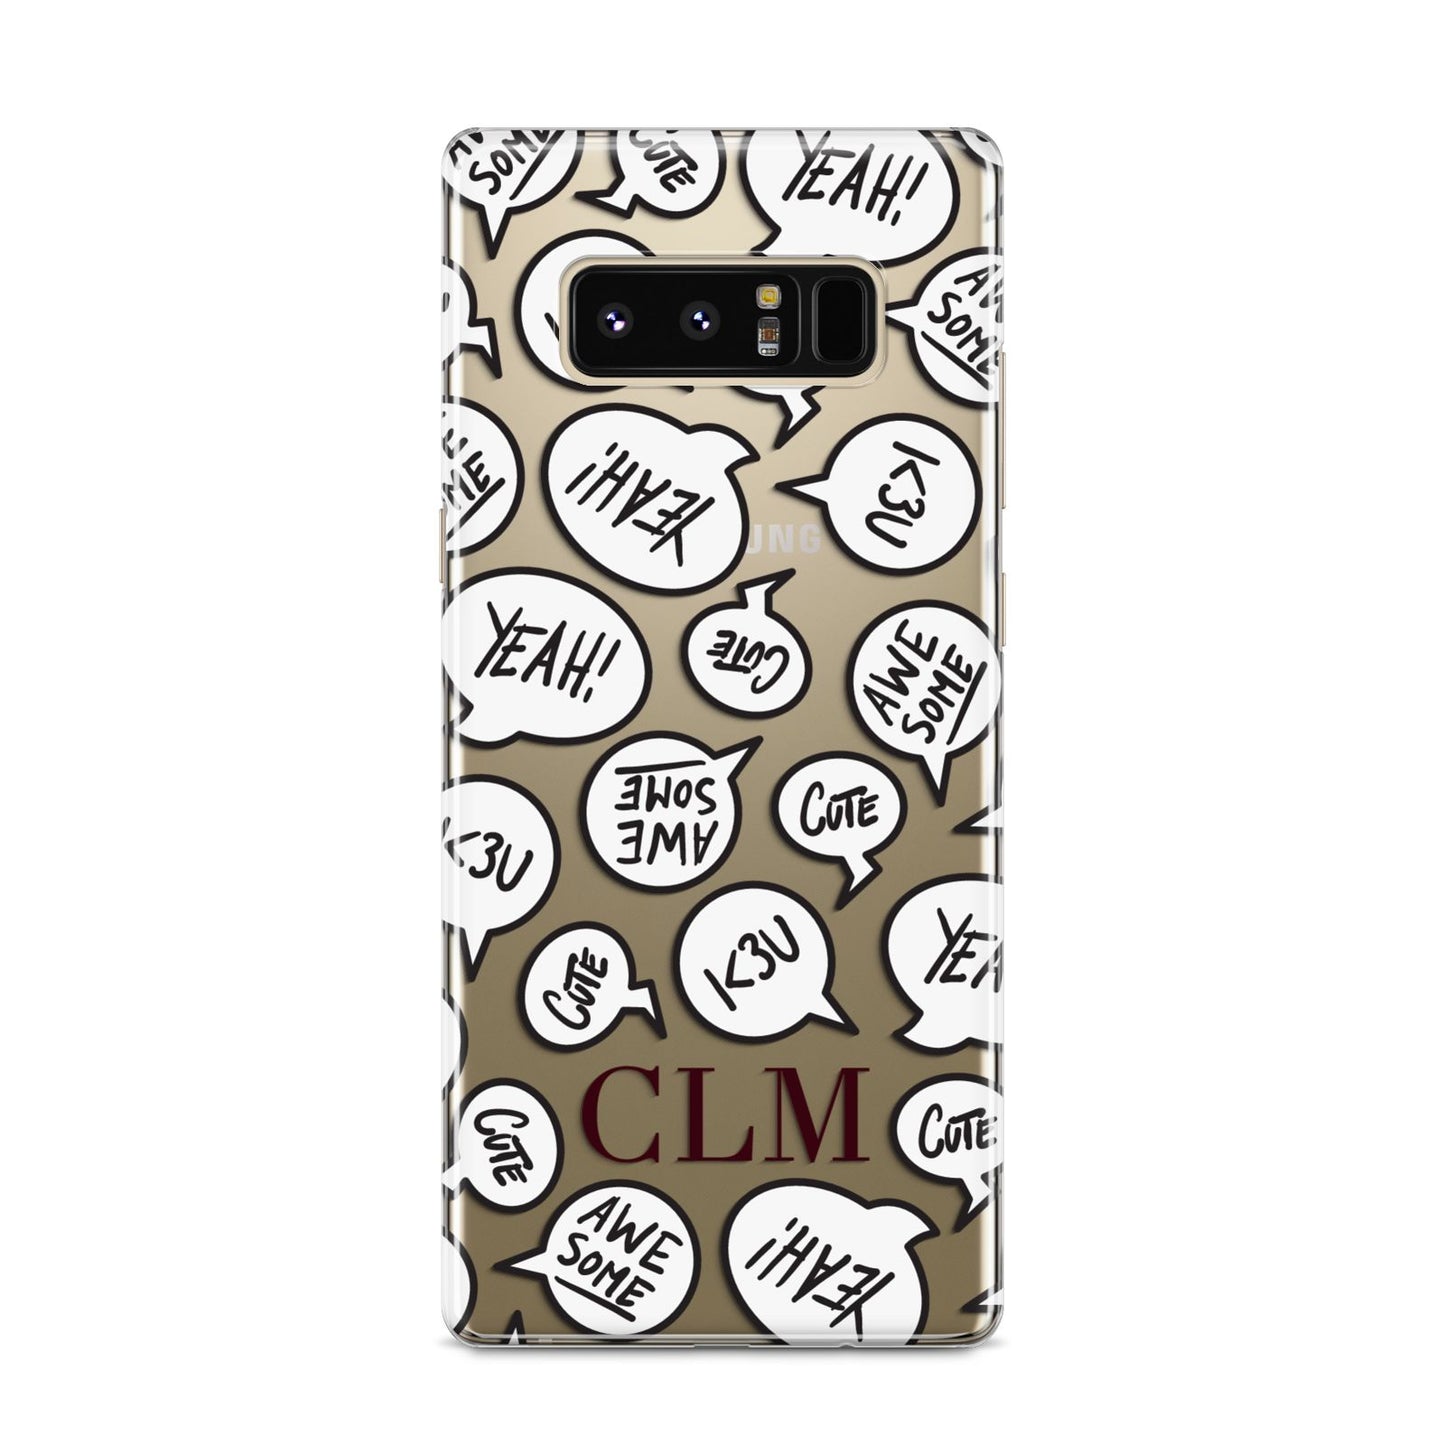 Personalised Sayings With Initials Samsung Galaxy S8 Case